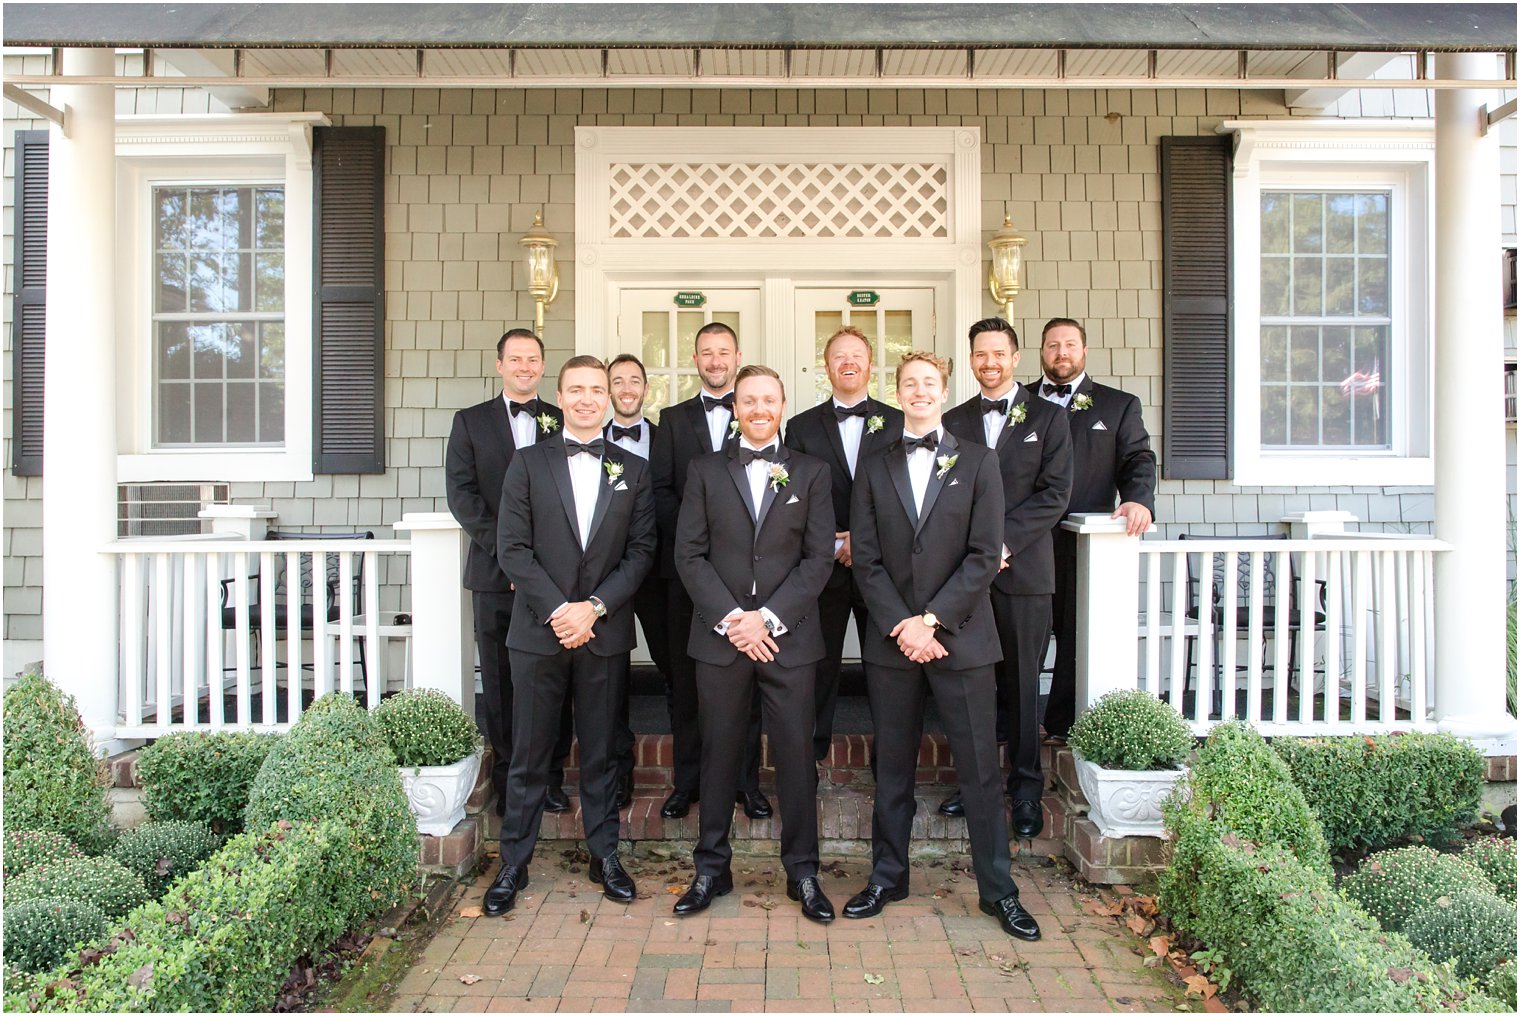 Groom and groomsmen at The Chateau, Spring Lake NJ